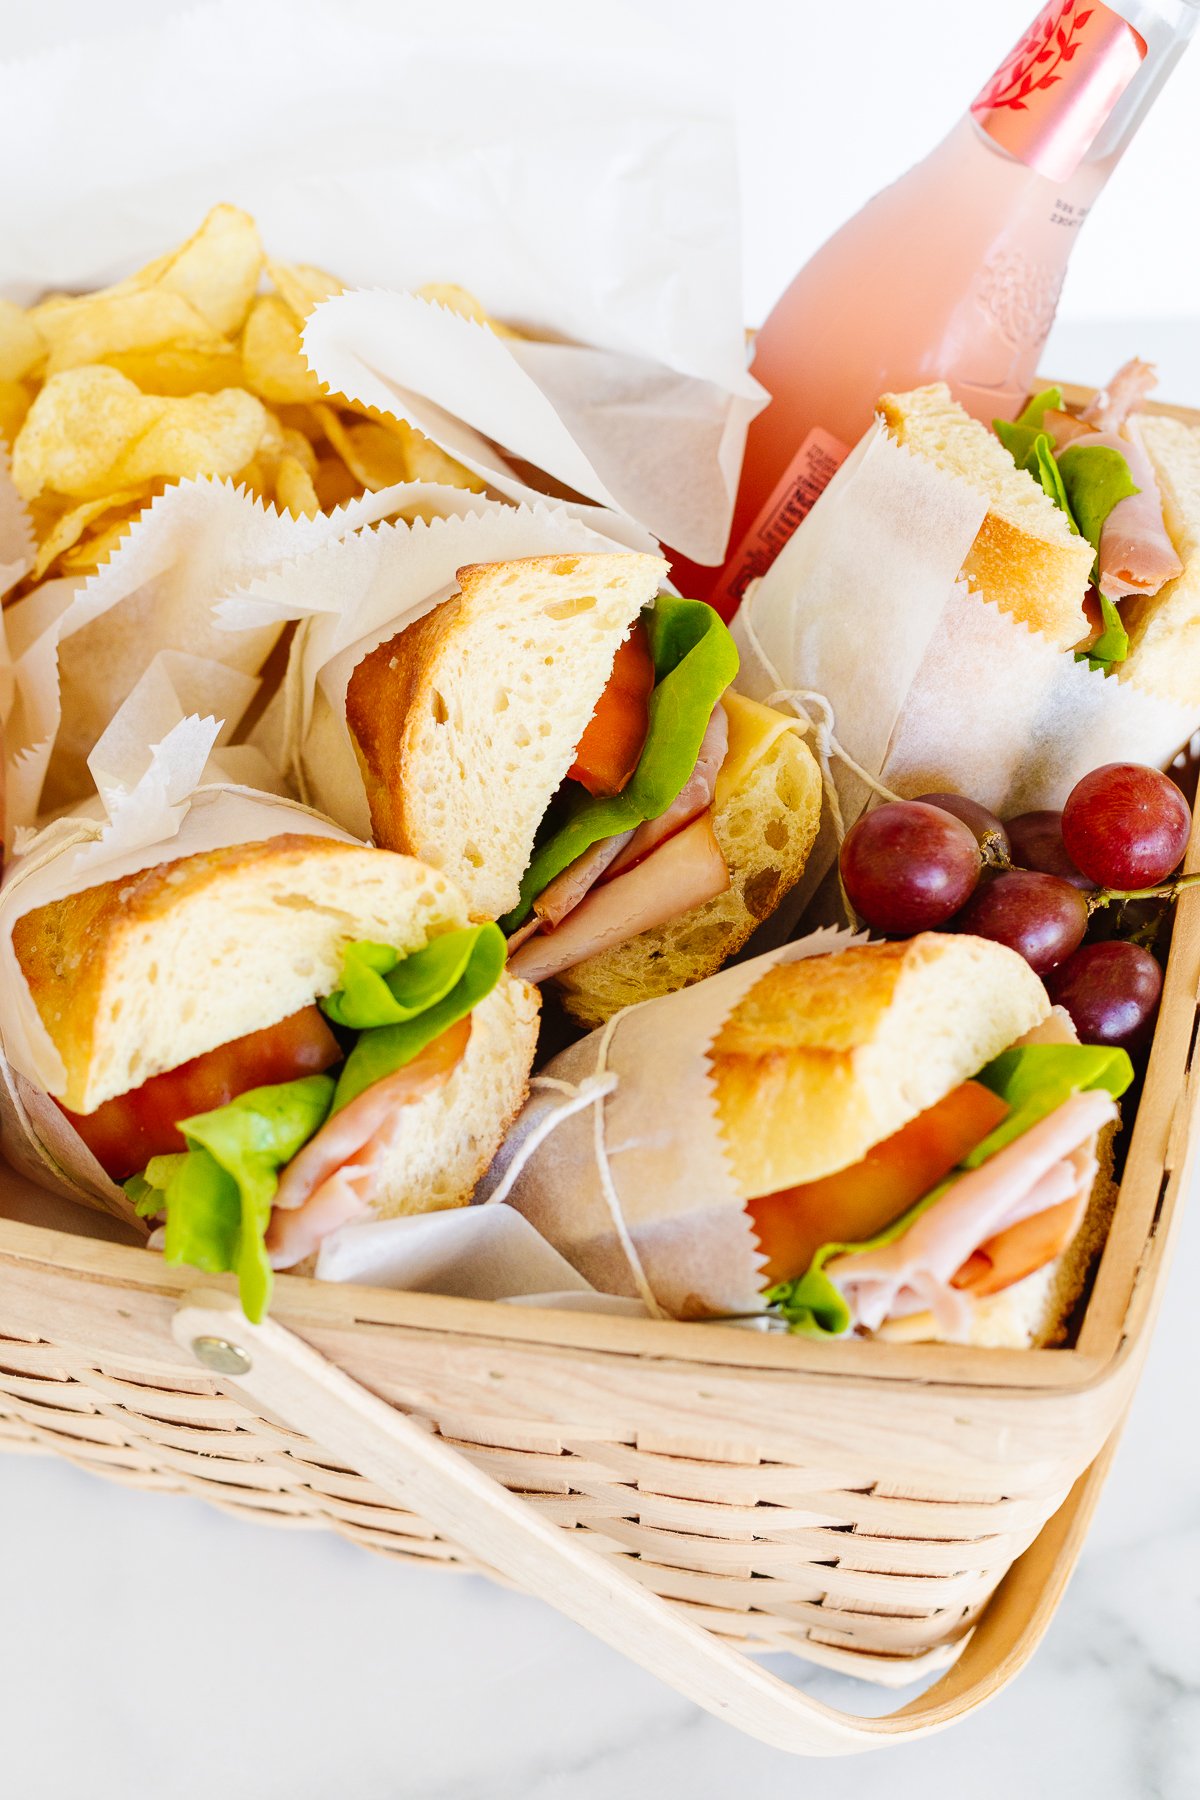 A picnic basket filled with sandwiches and chips.